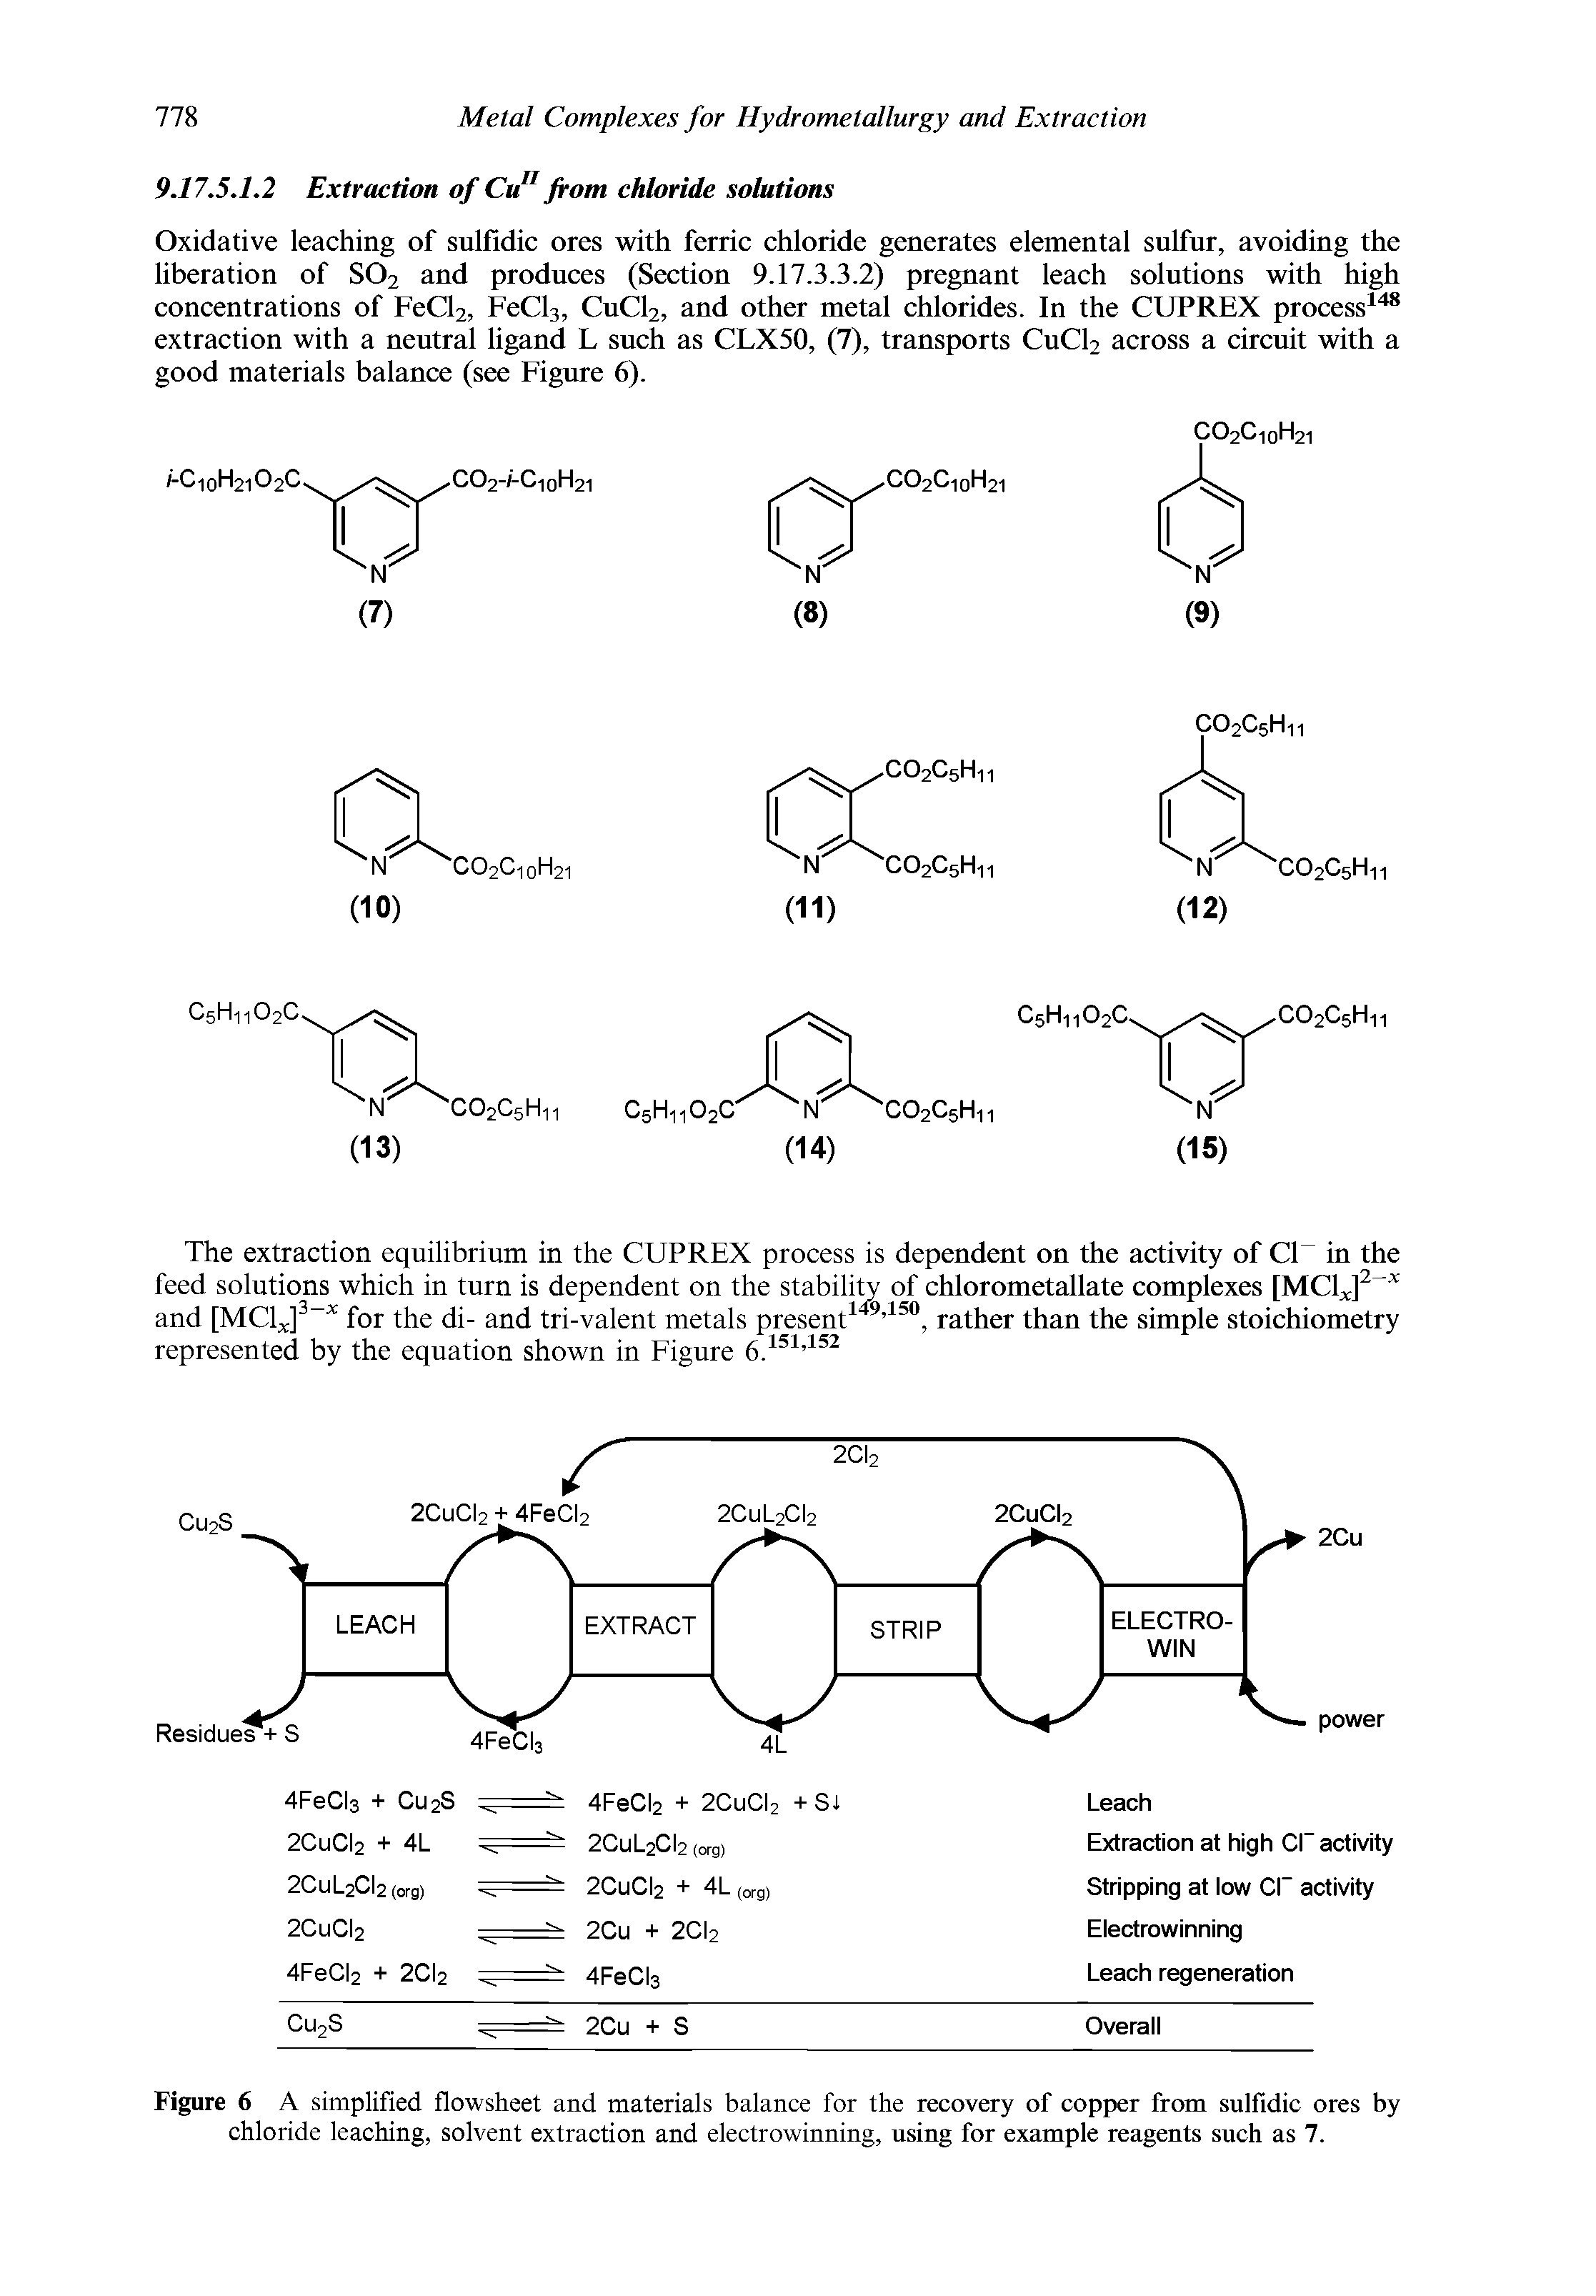 Figure 6 A simplified flowsheet and materials balance for the recovery of copper from sulfldic ores by chloride leaching, solvent extraction and electrowinning, using for example reagents such as 7.